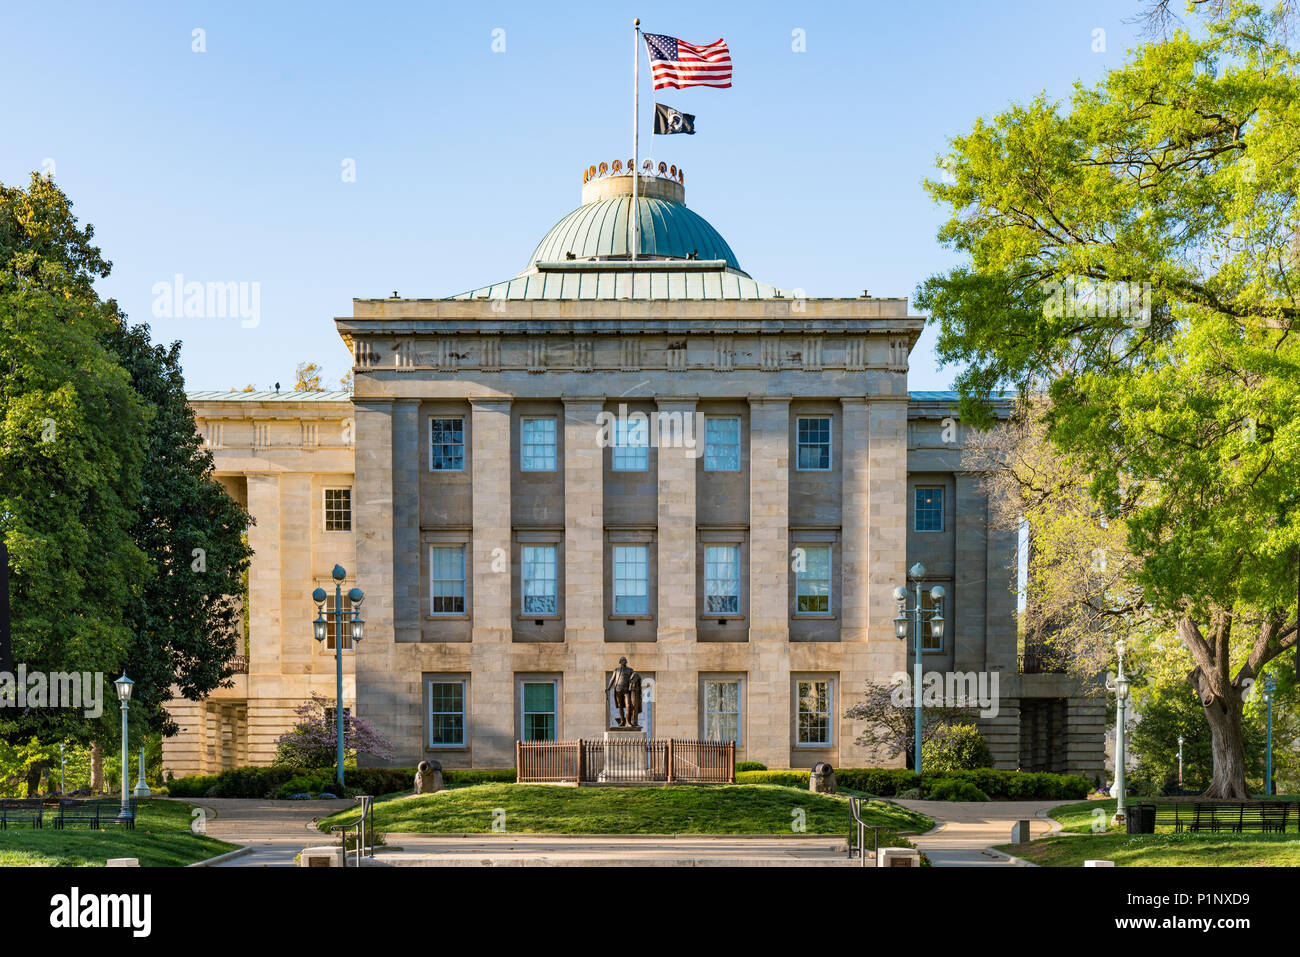 RALEIGH, NC - 17. APRIL 2018: North Carolina Capitol Building in Raleigh Stockfoto